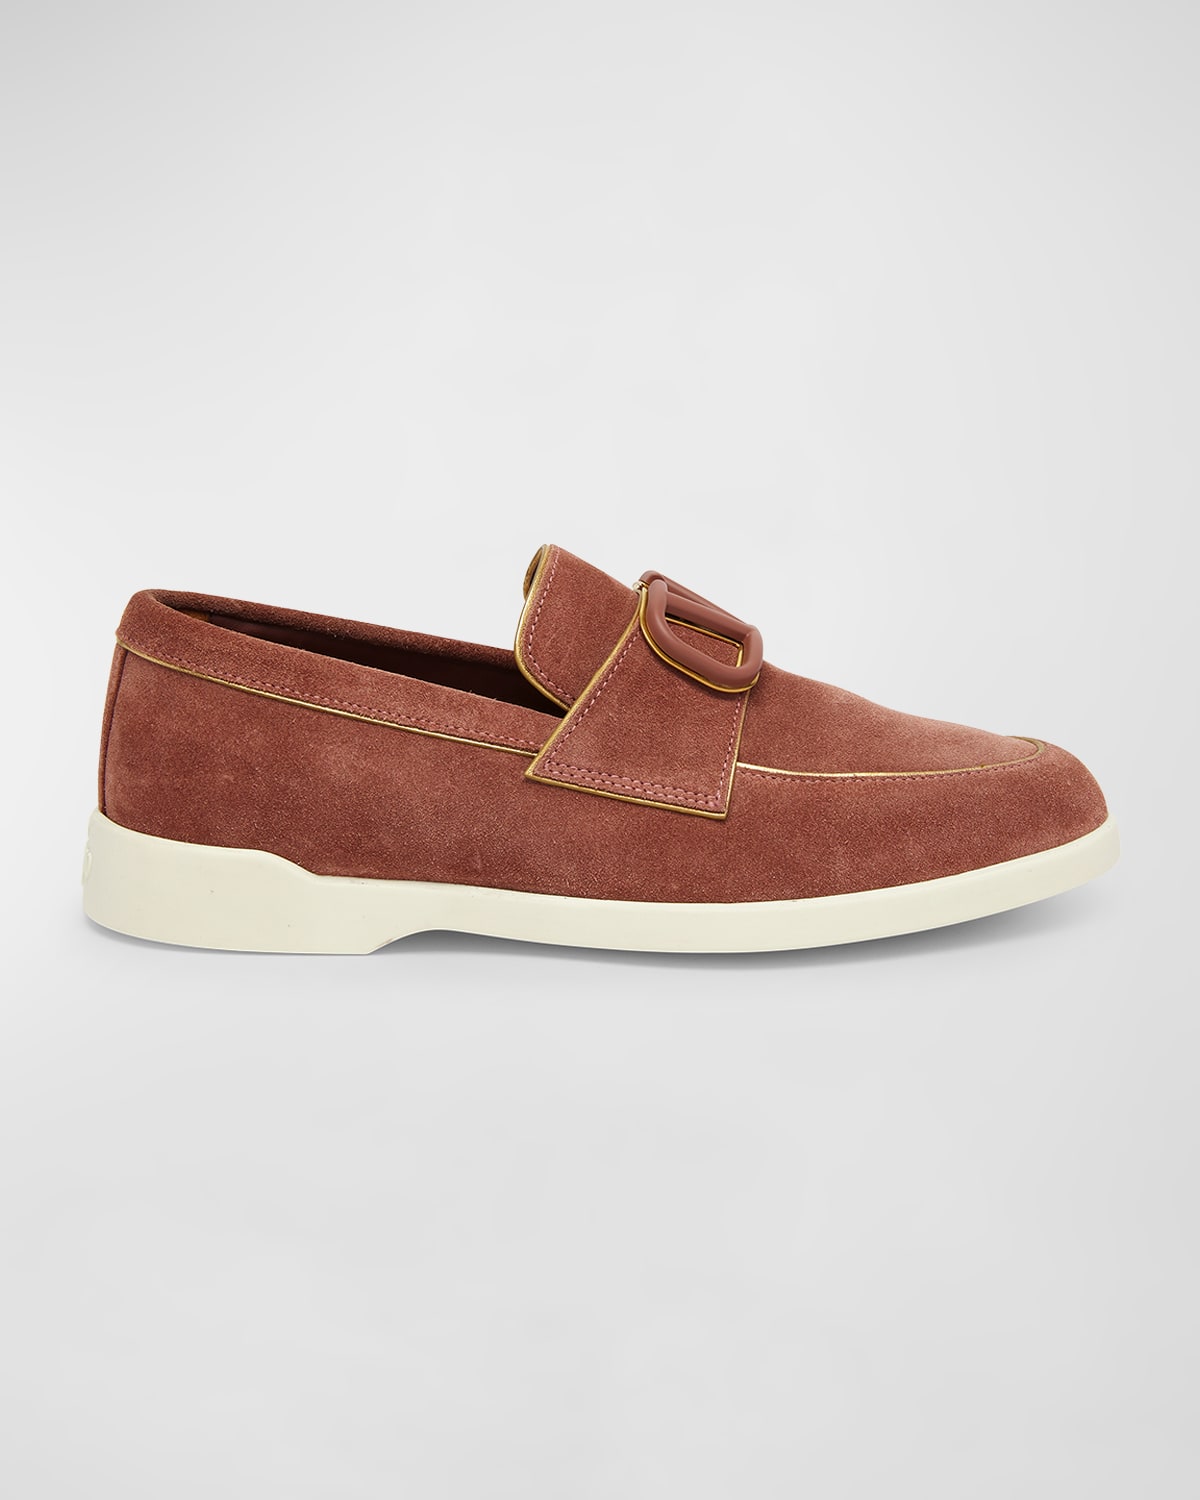 VLogo Suede Easy Loafers